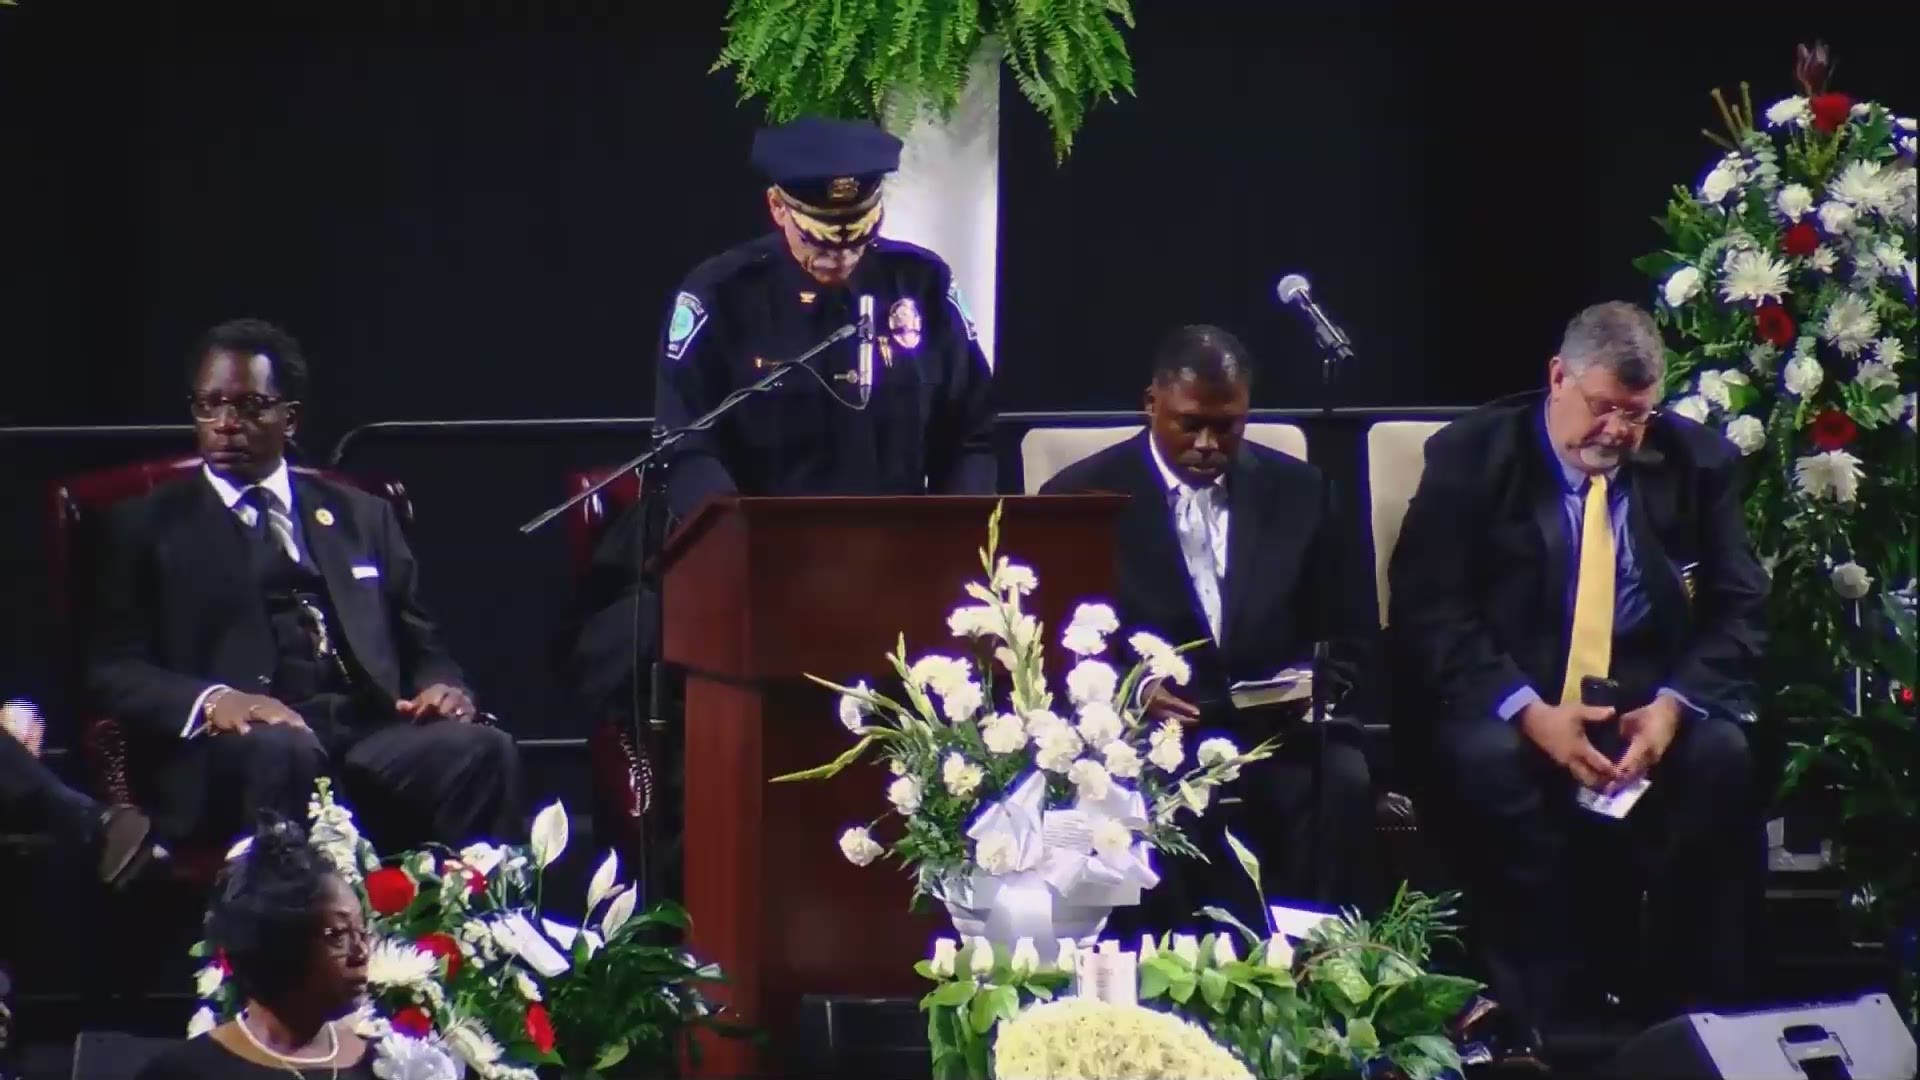 At his memorial, Florence, SC Sgt. Terrence Carraway was given his final end of watch call, a tribute to fallen officers.